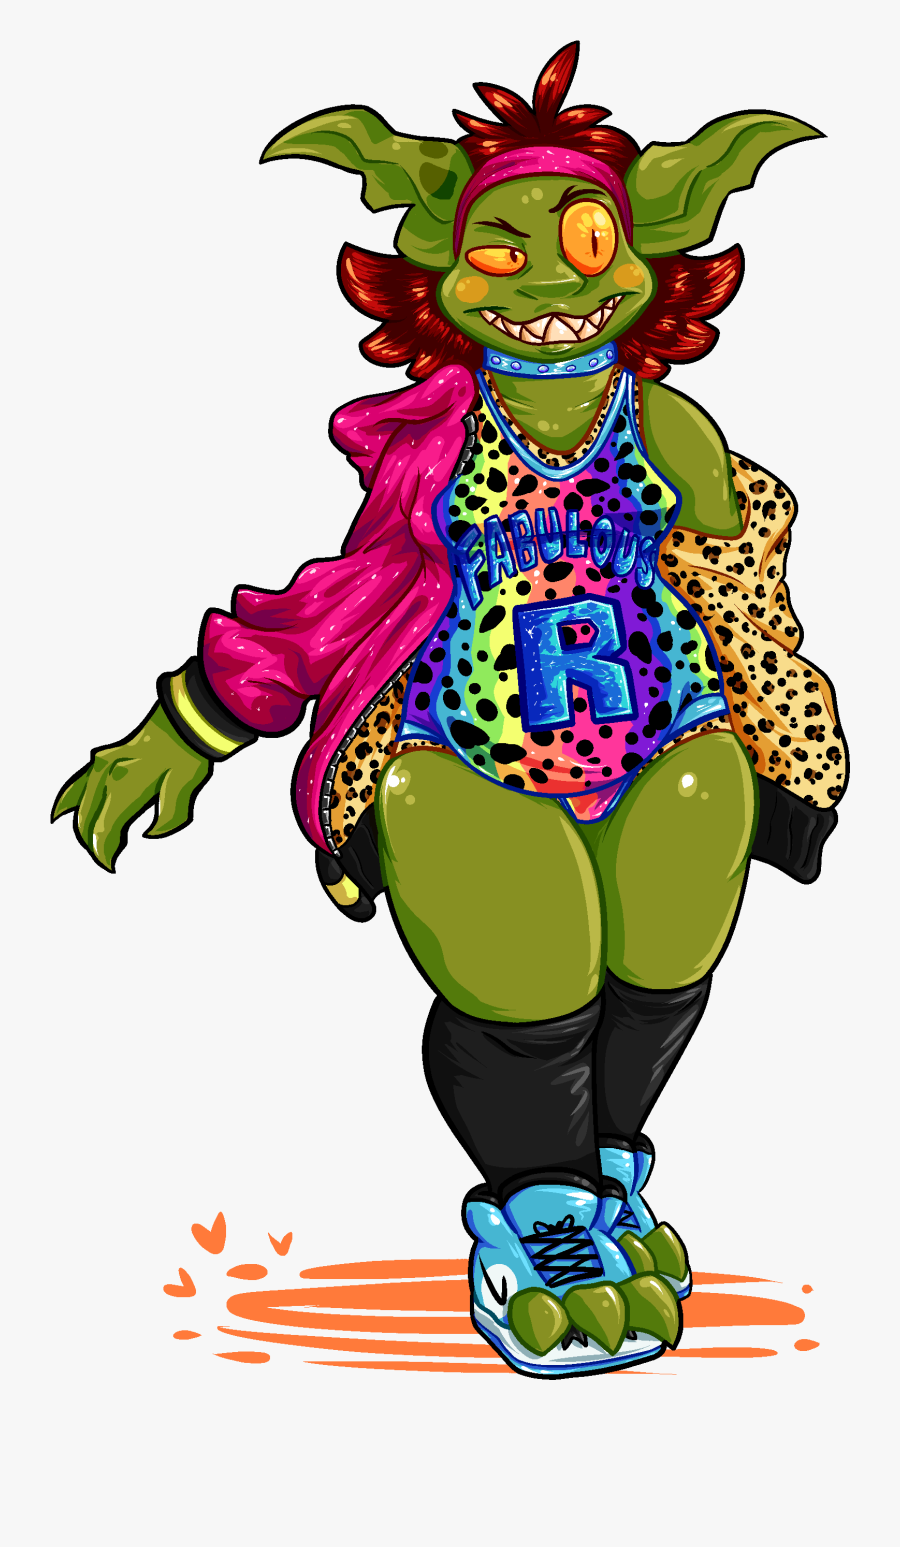 Inspired By Carmella"s Lisa Frank Outfit From Wwe, - Transparent Lisa Frank Cartoon, Transparent Clipart